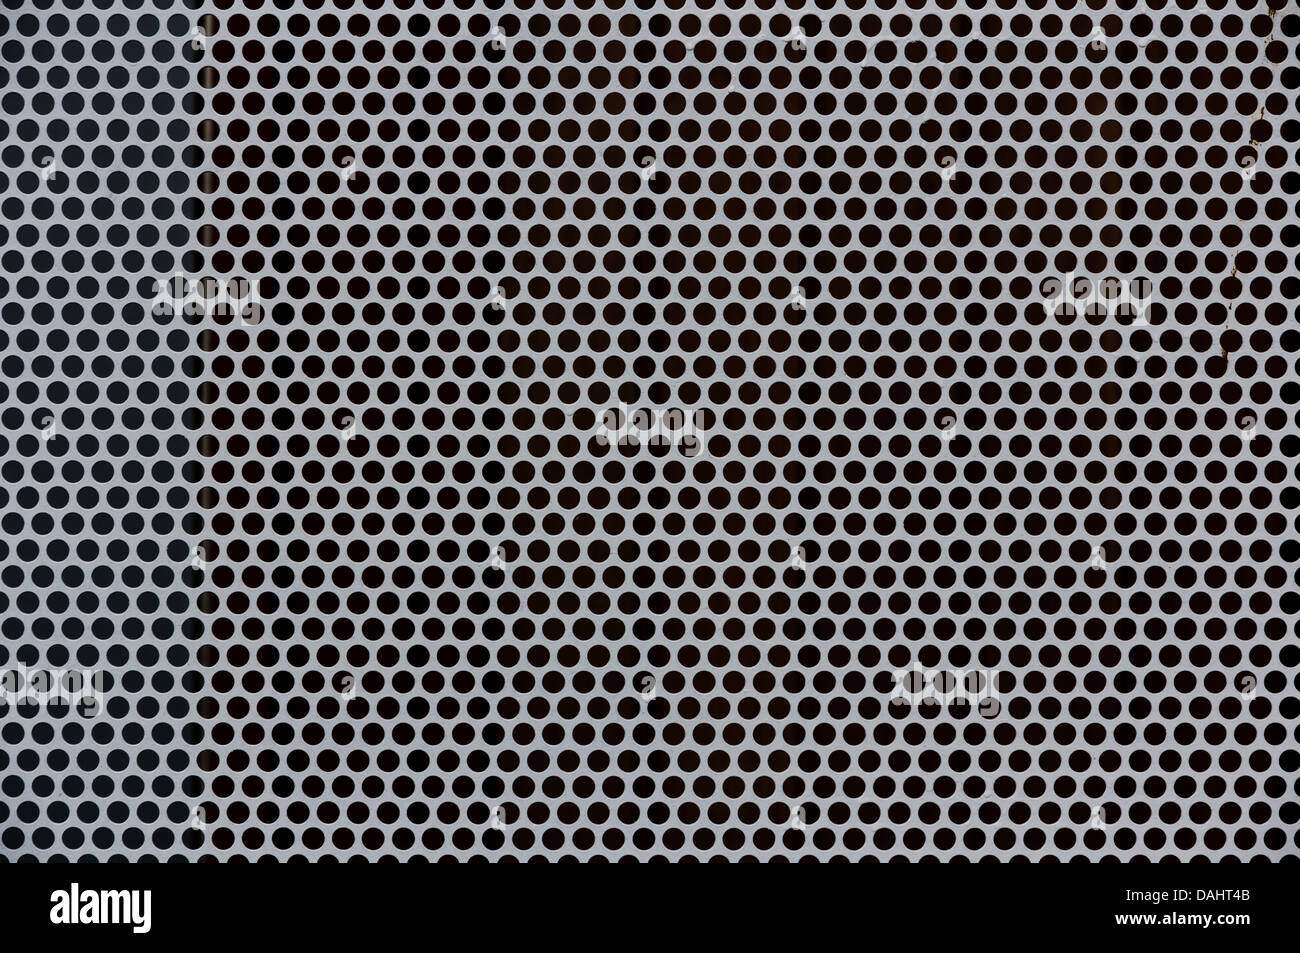 Background of gray metal with perforated holes Stock Photo